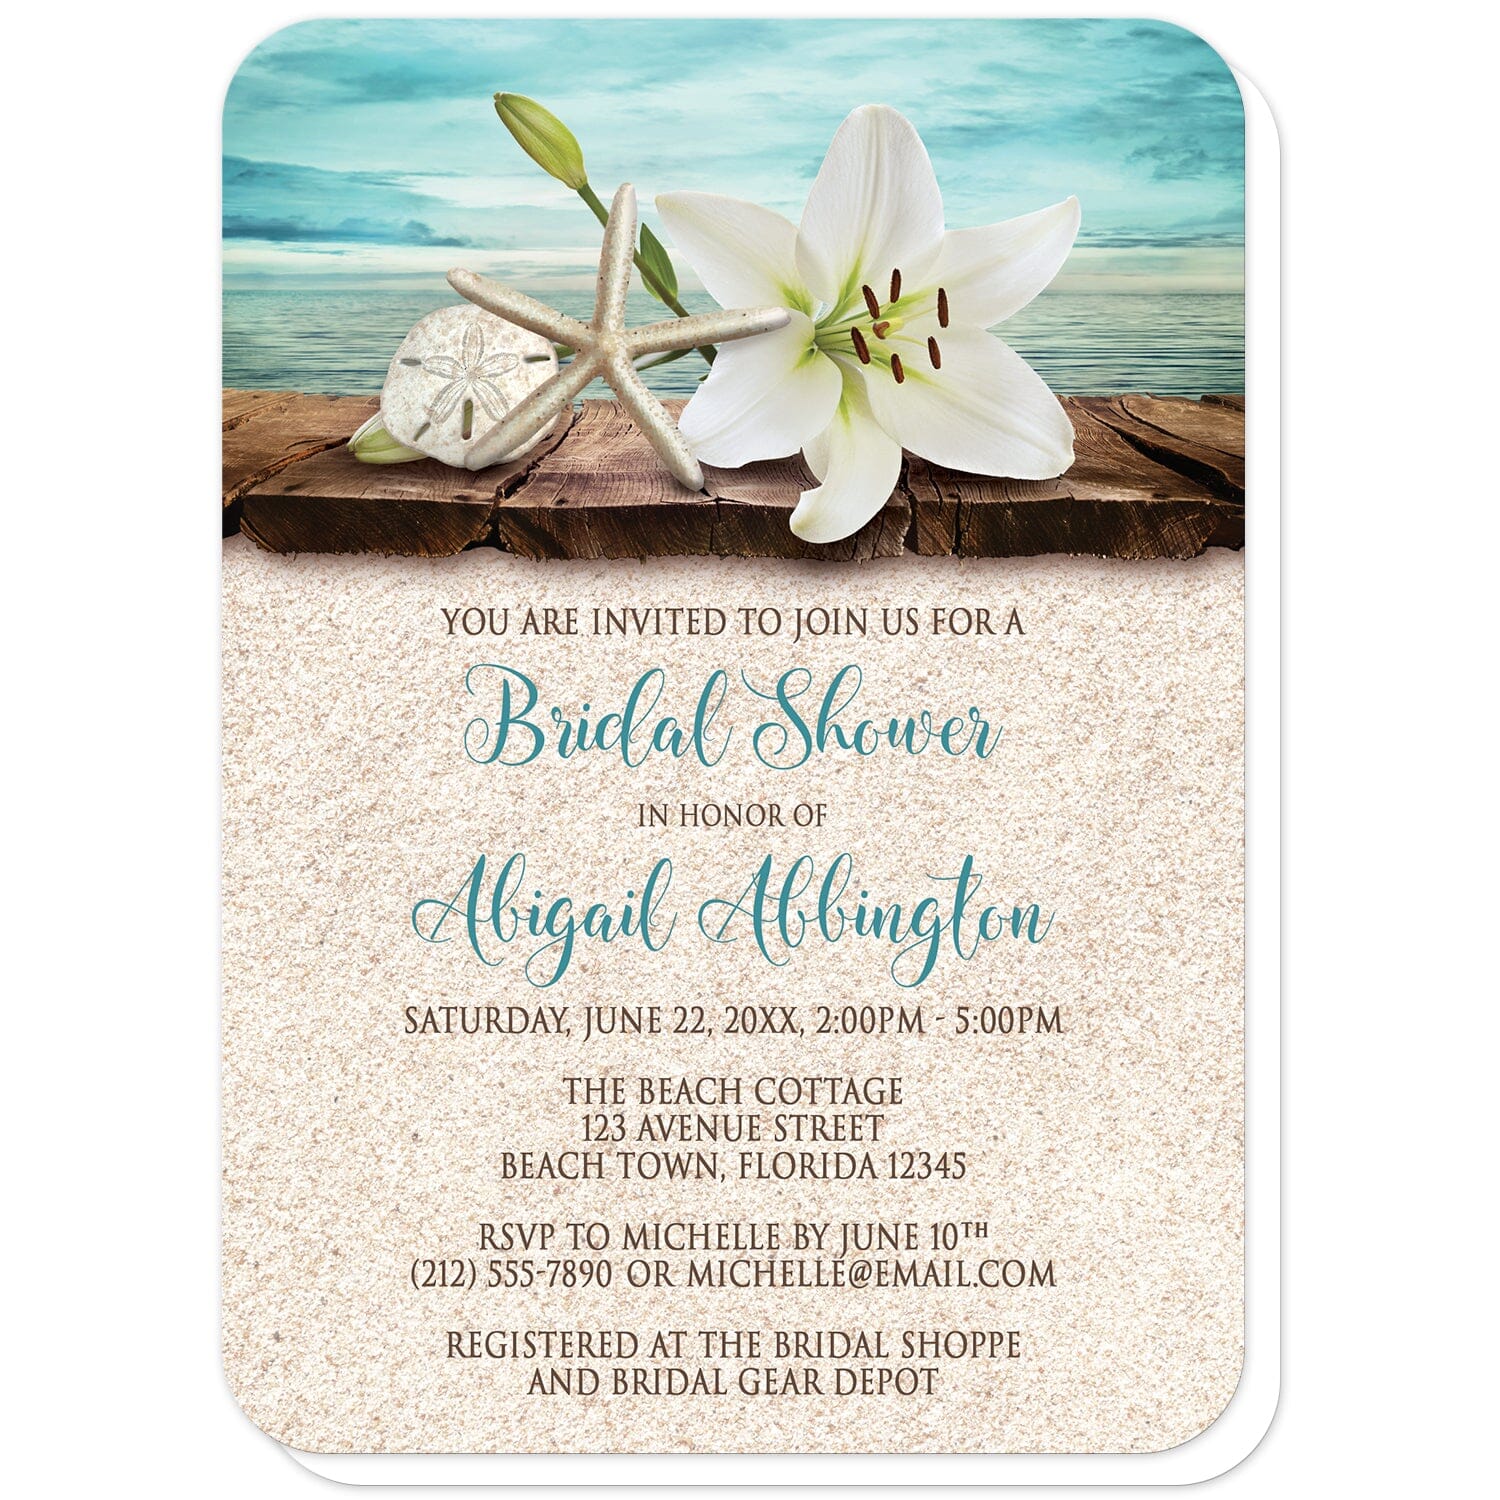 Lily Seashells and Sand Beach Bridal Shower Invitations (with rounded corners) at Artistically Invited. Floral lily seashells and sand beach bridal shower invitations with an elegant white lily, a starfish, and a sand dollar on a rustic wood dock overlooking the open water. Your personalized bridal shower celebration details are custom printed in dark brown and teal over a beige sand background design.